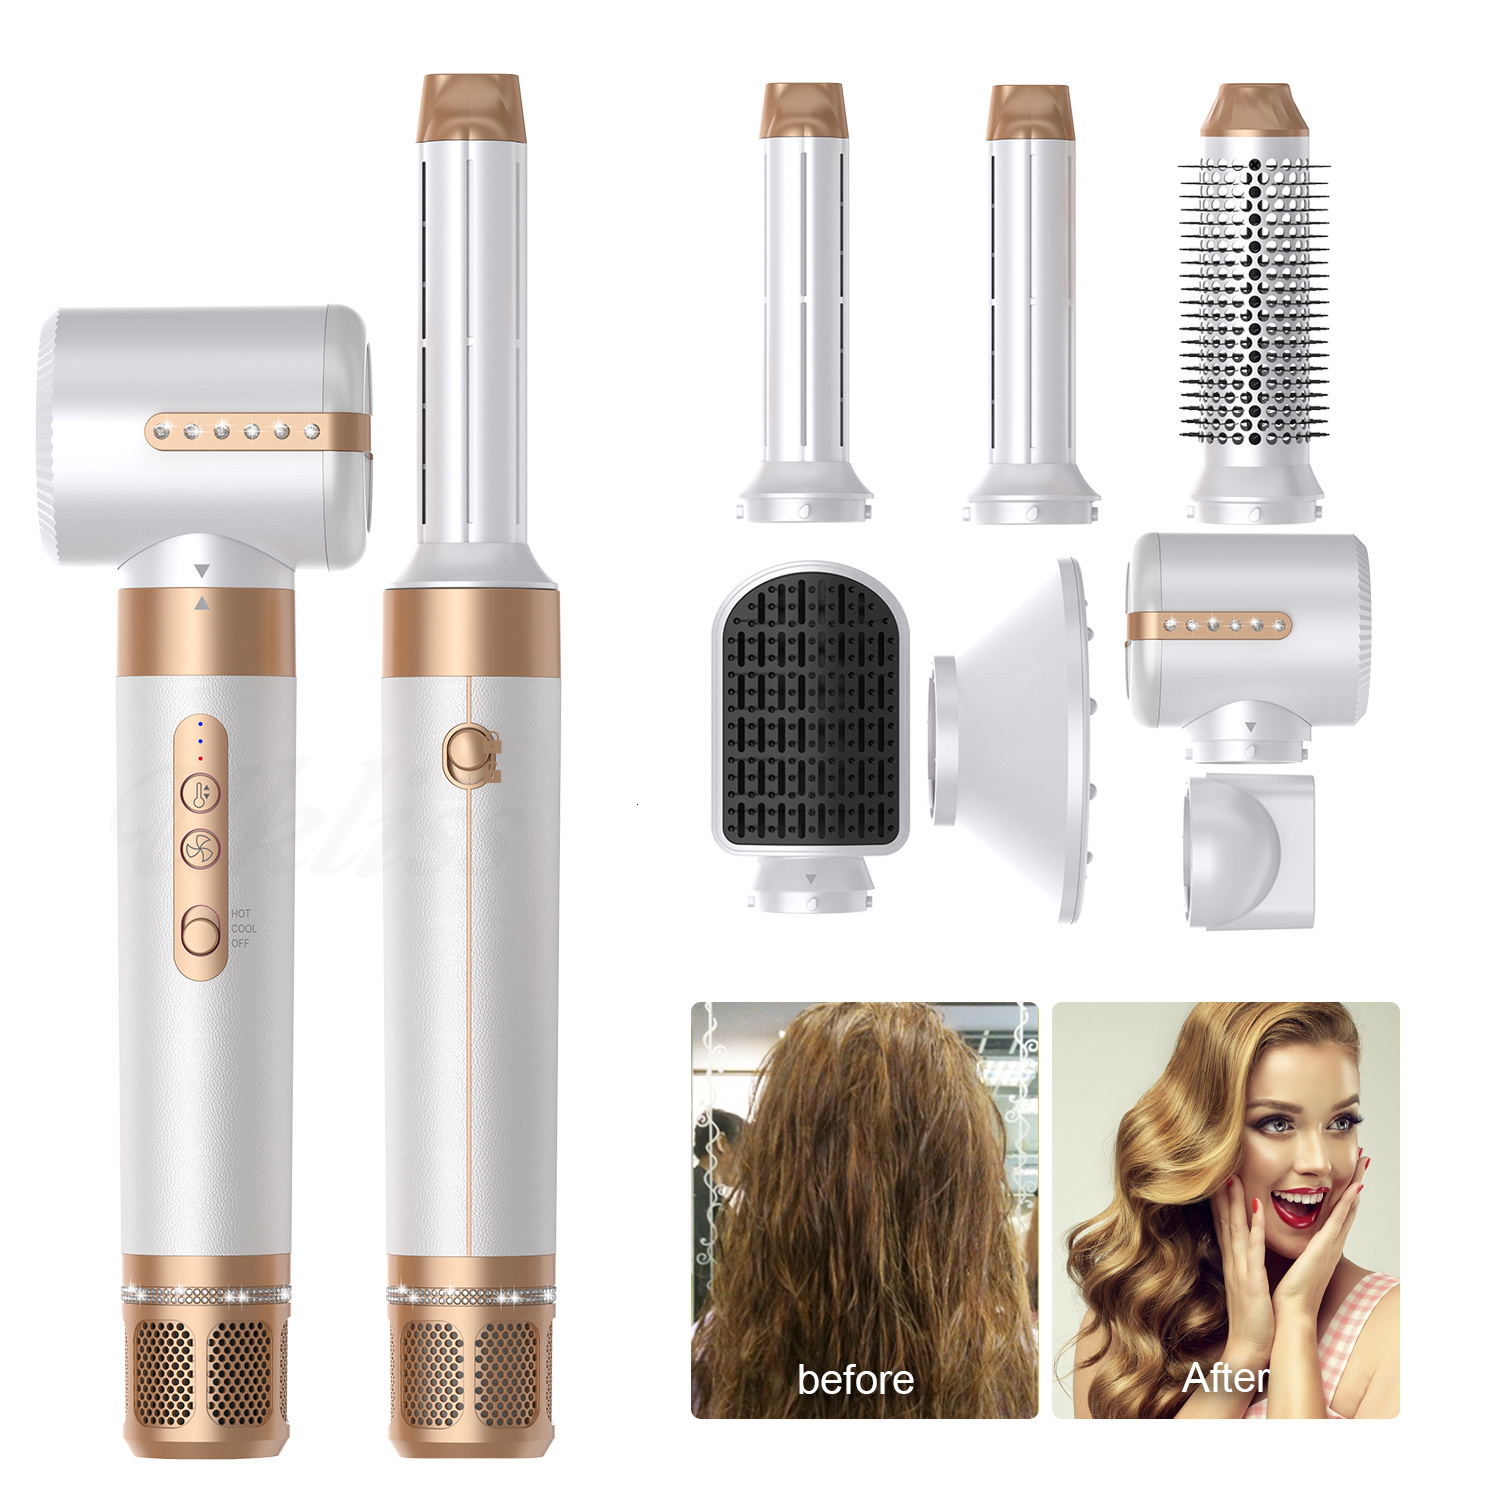 

Curling Irons Professional High Speed Hair Dryer 5 in 1 Styler Air Brush Blow Brushless Motor dryer Negative Ionic Curler 221119